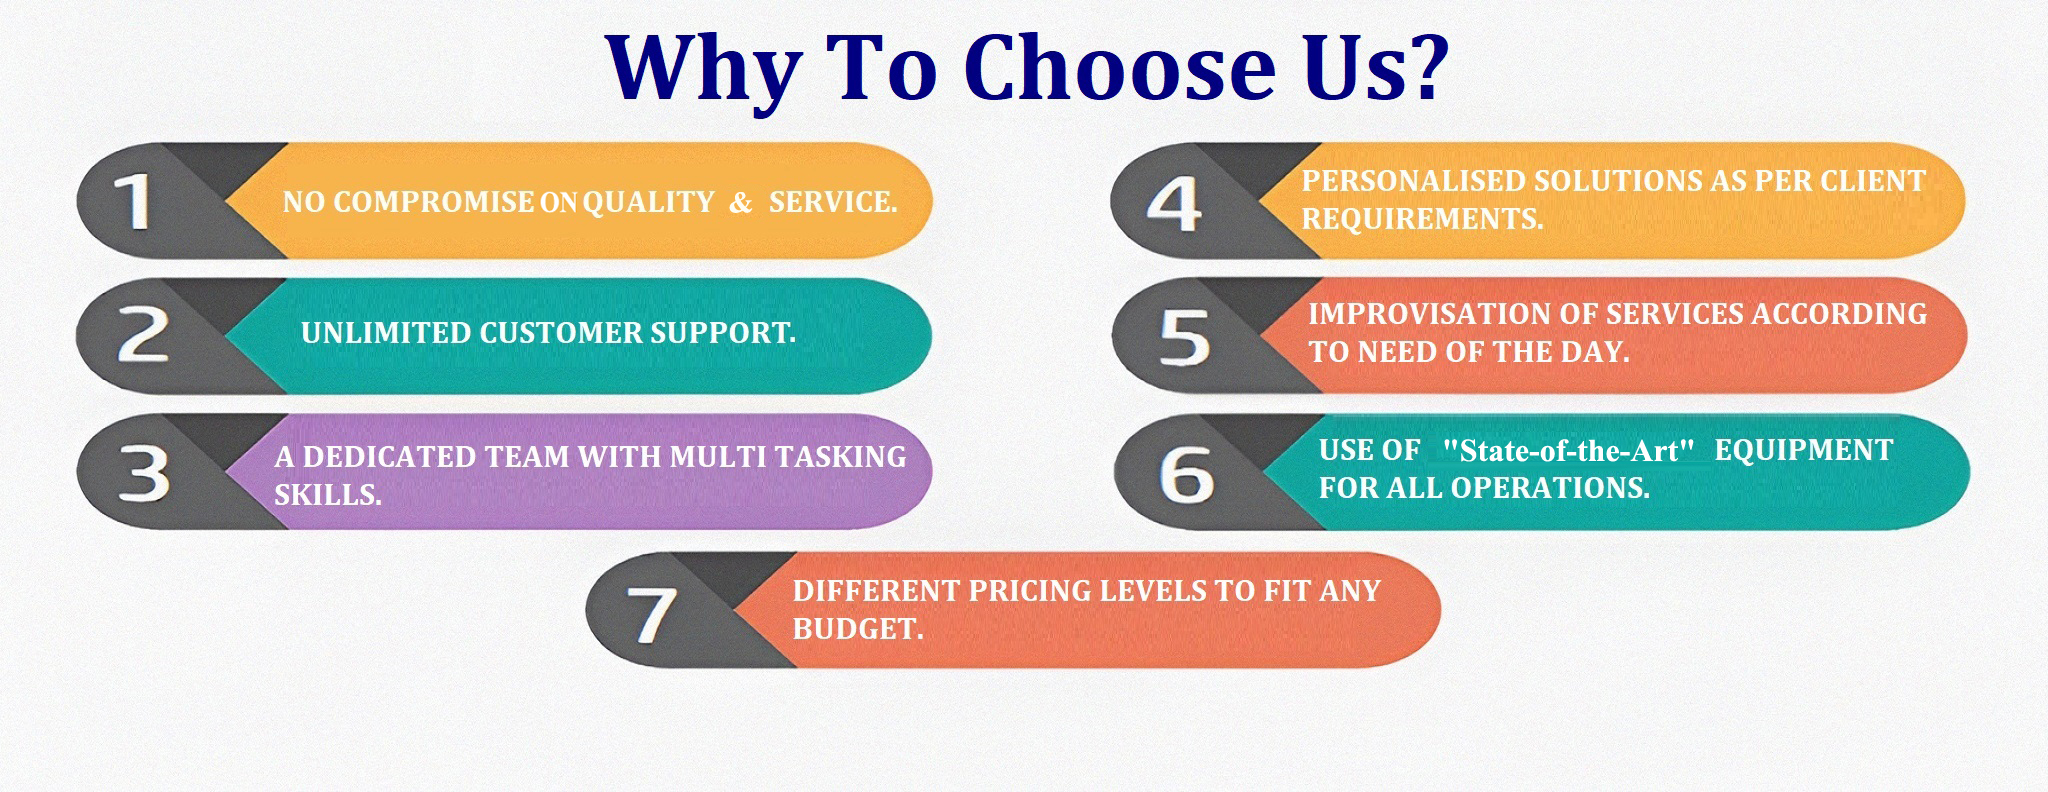 Why To Choose Us?